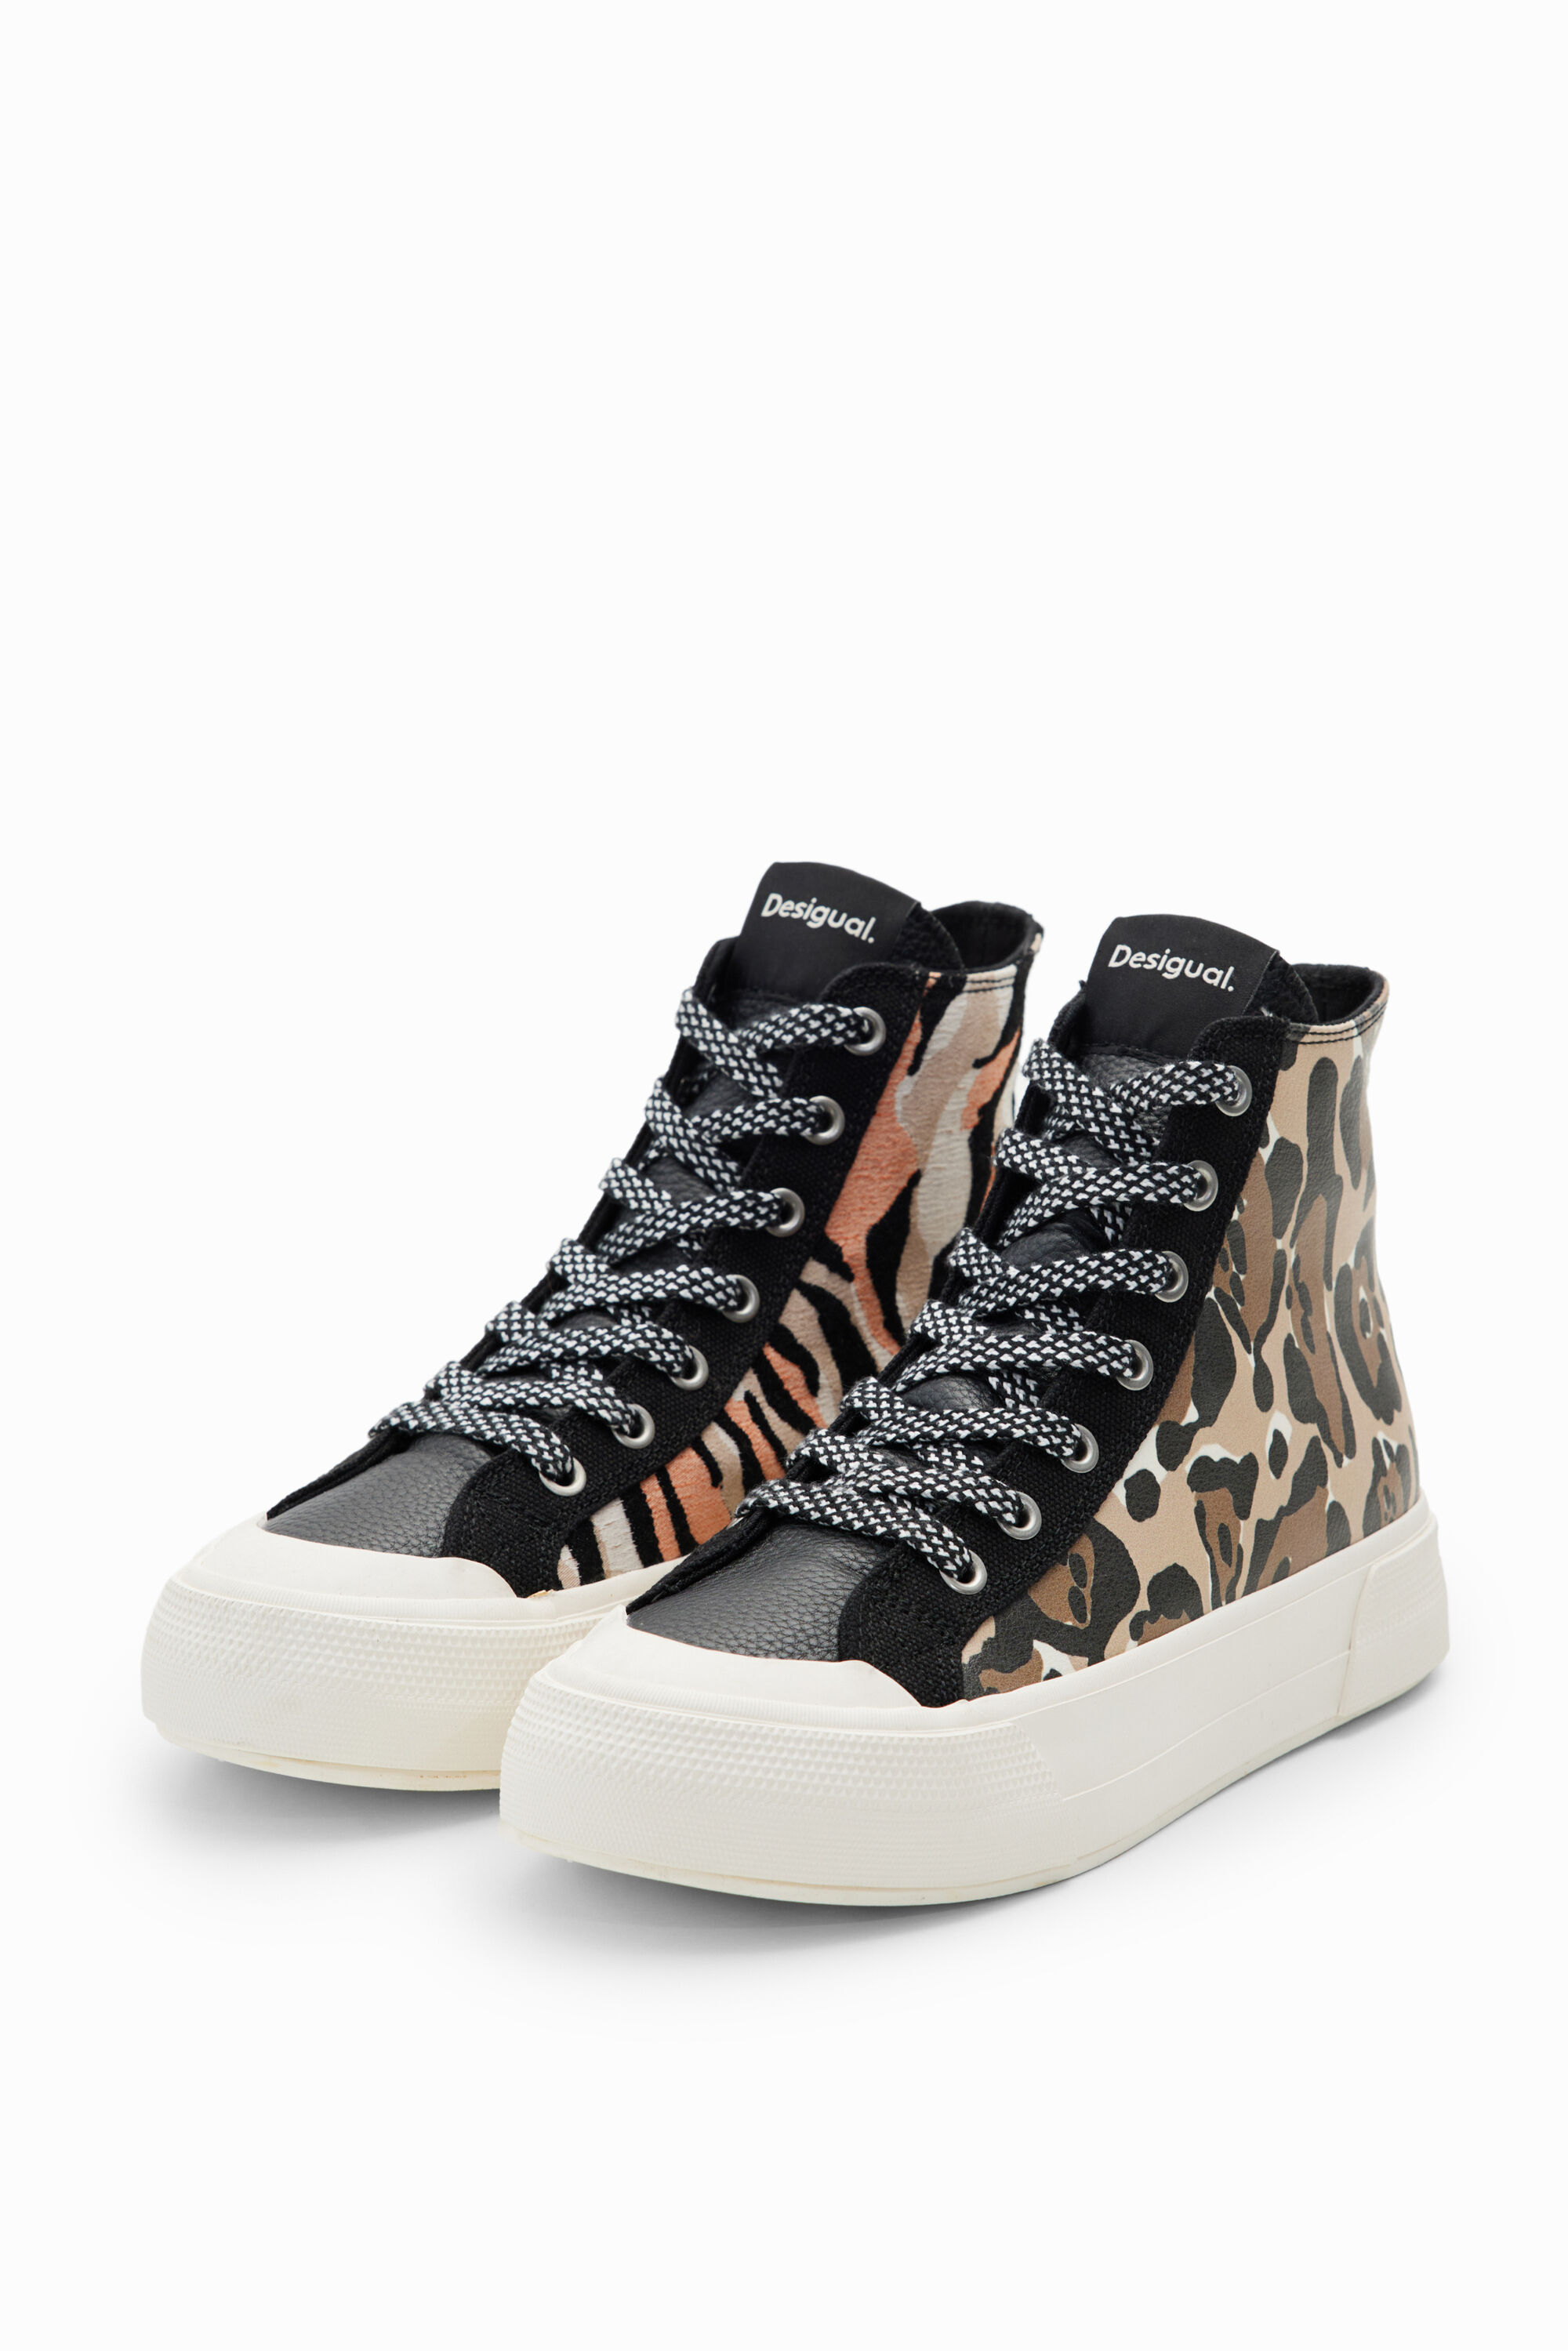 High-top animal print sneakers - MATERIAL FINISHES - 41